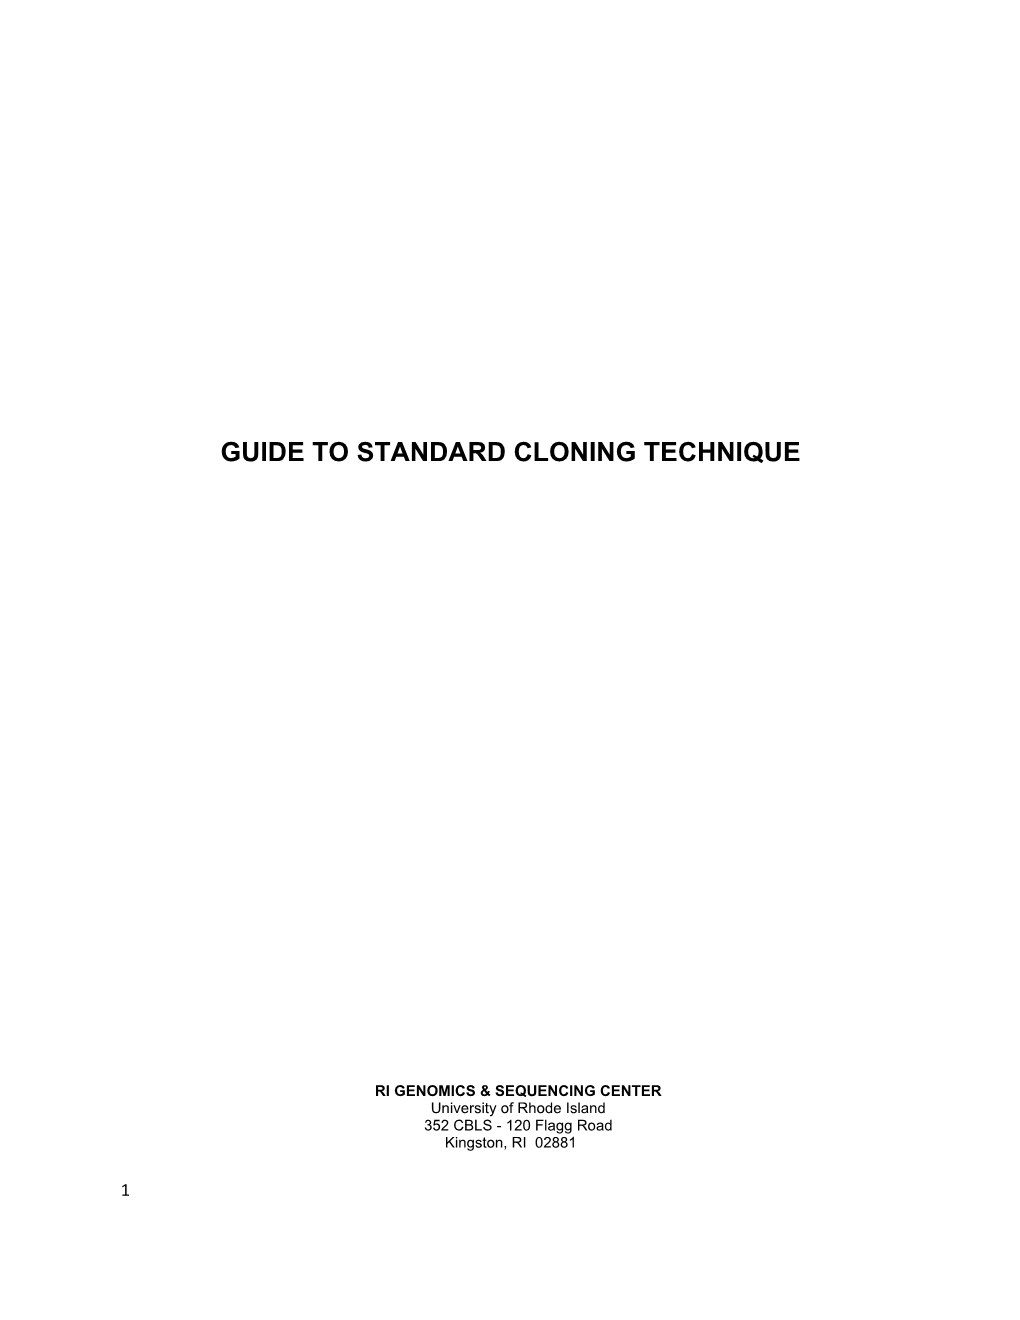 Guide to Standard Cloning Technique